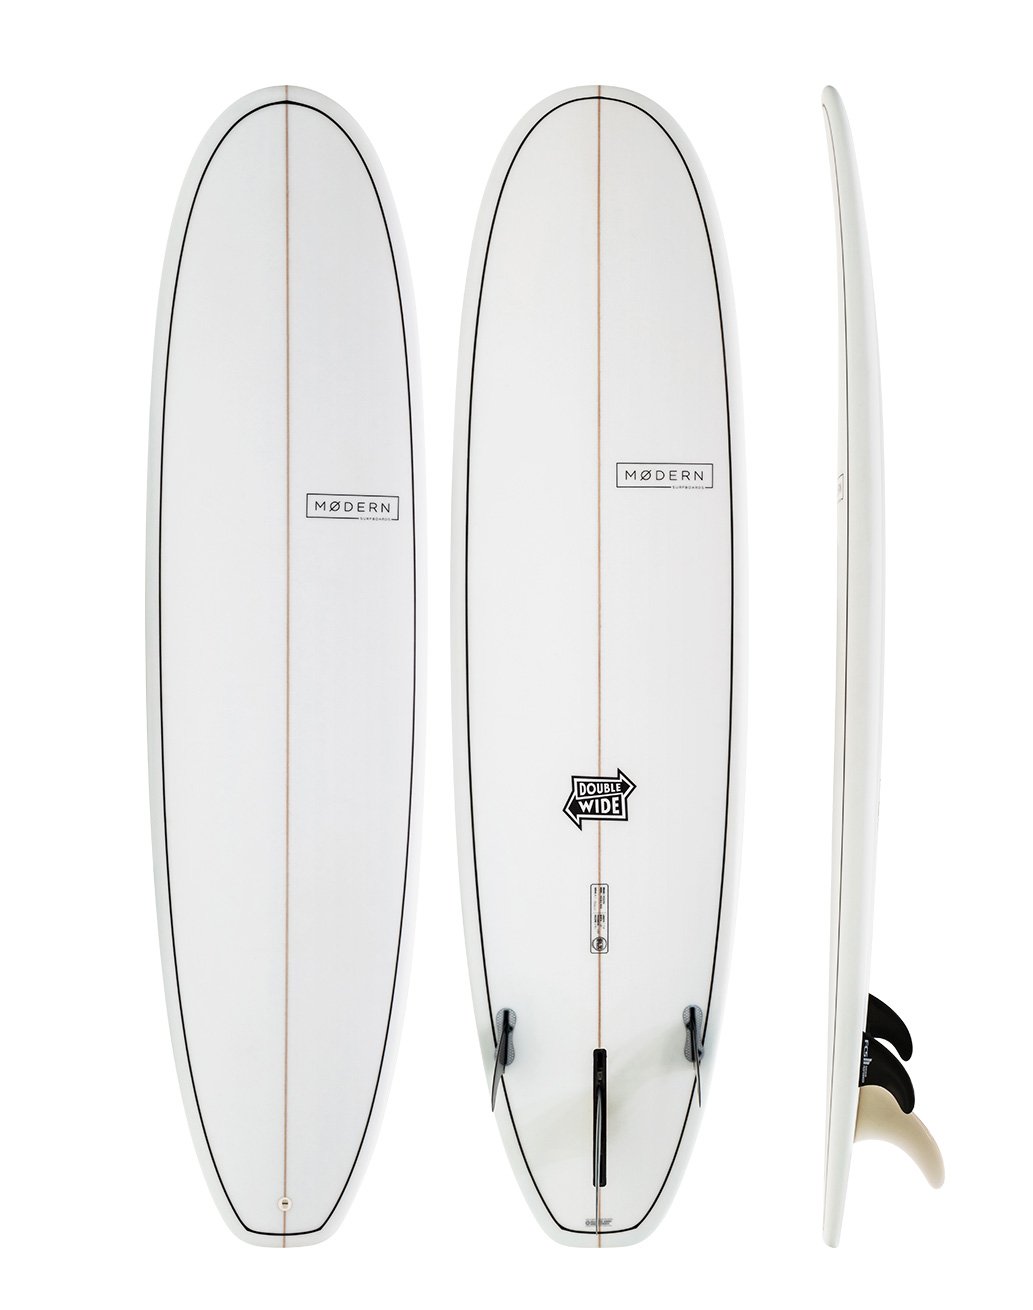 Modern Surfboards Double Wide - white mid length surfbaord